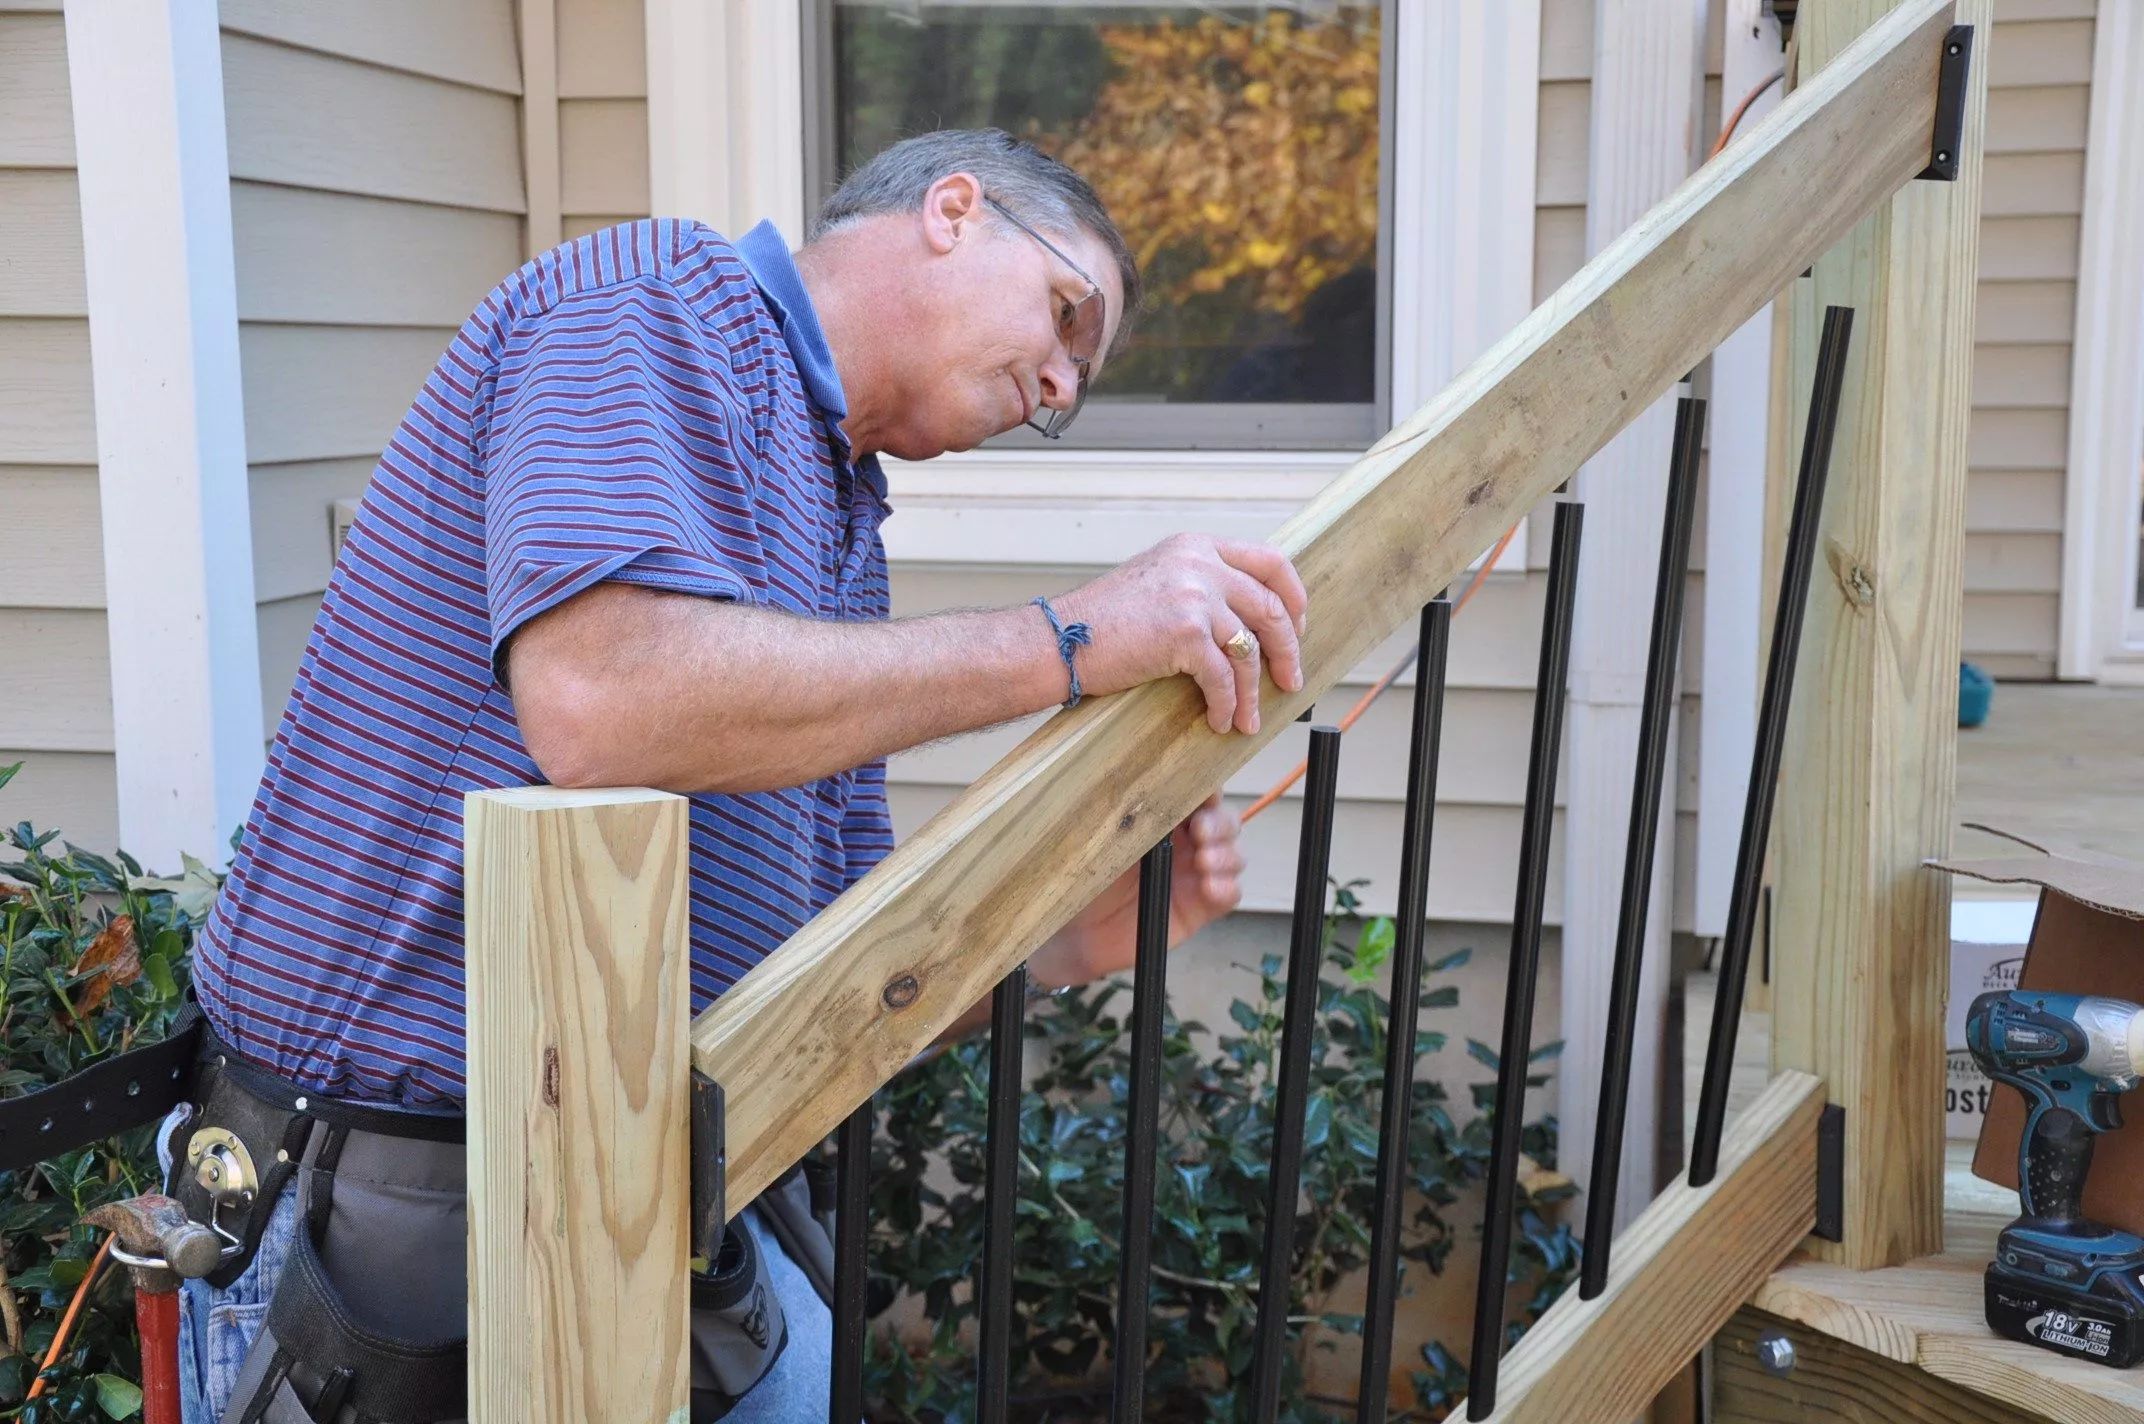 How to build porch railings on a budget